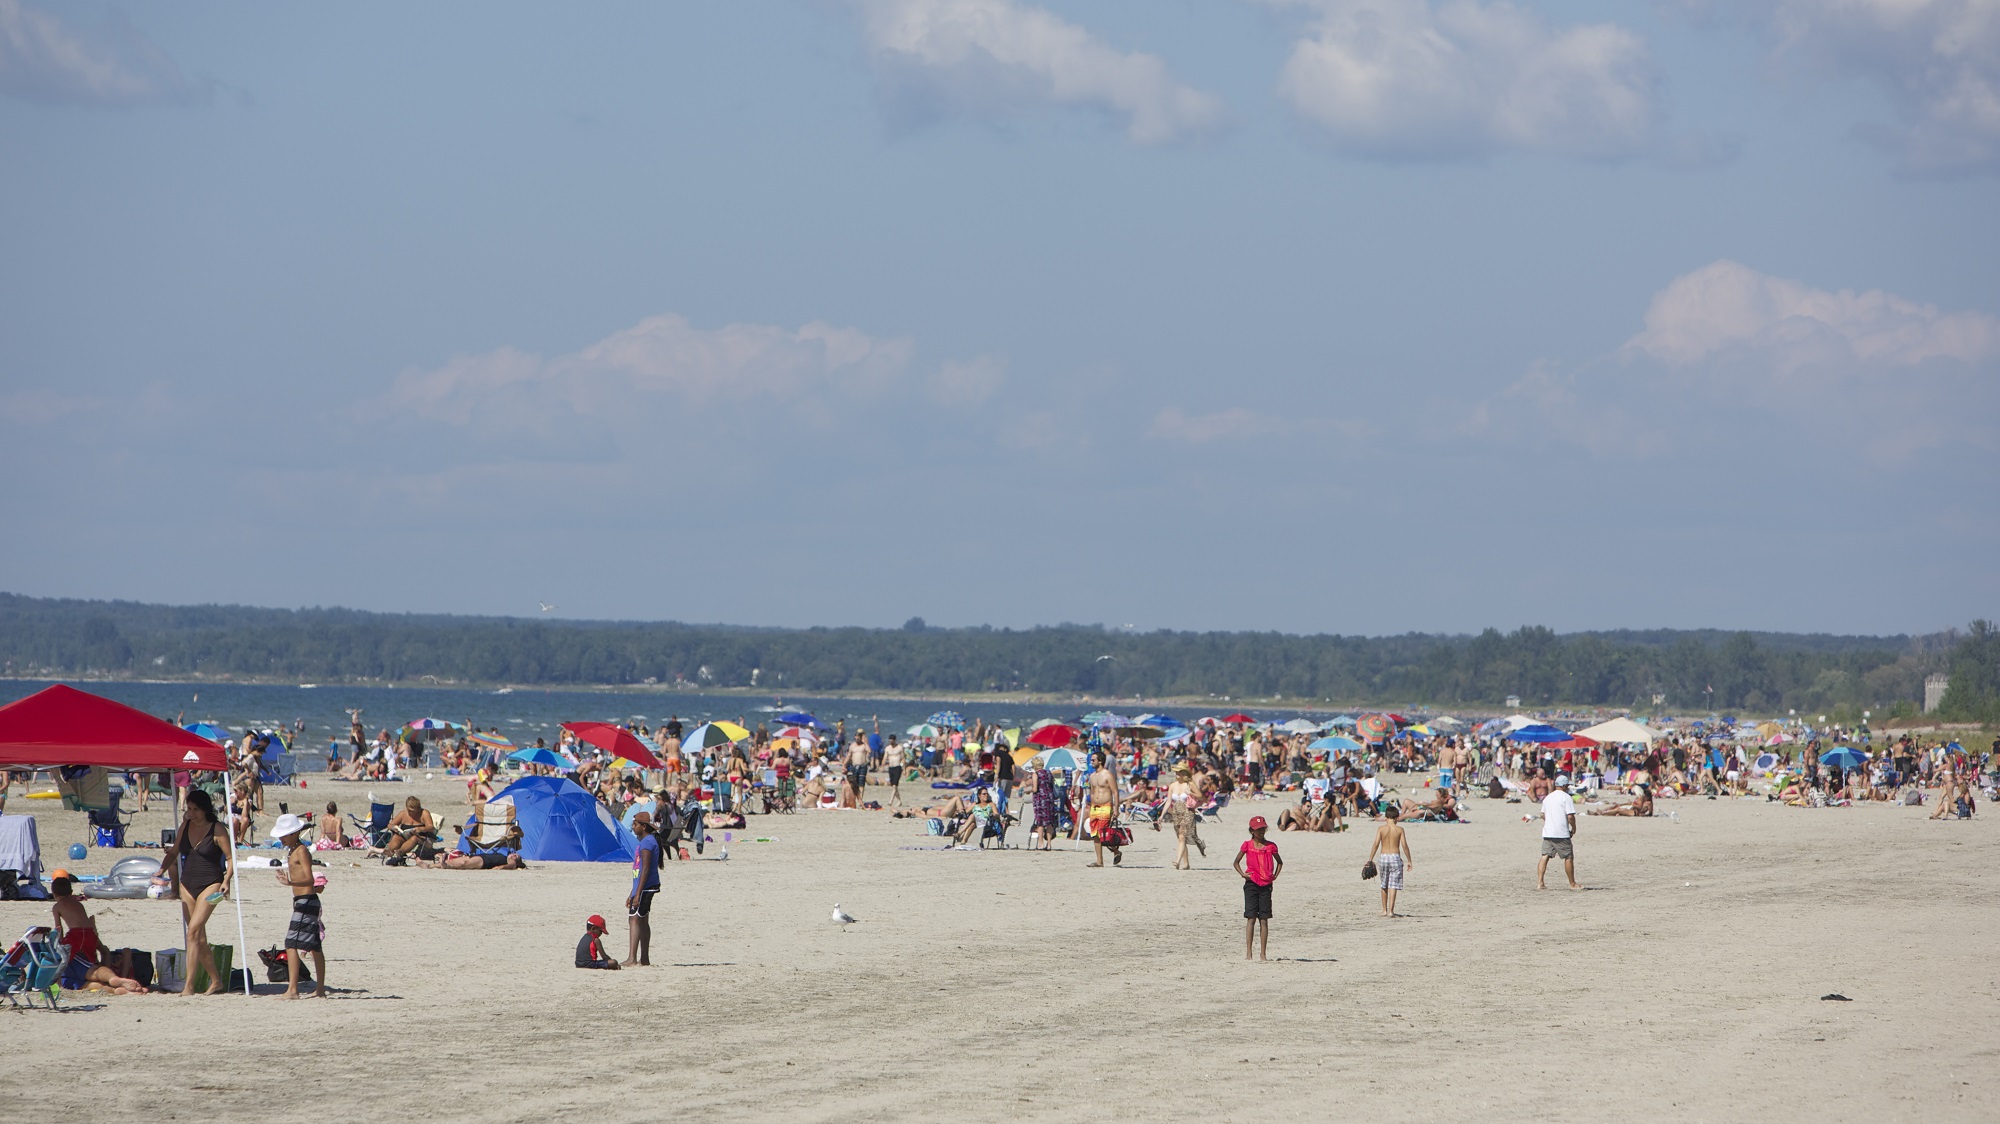 How to beat the crowds at Wasaga Beach | Ontario Parks